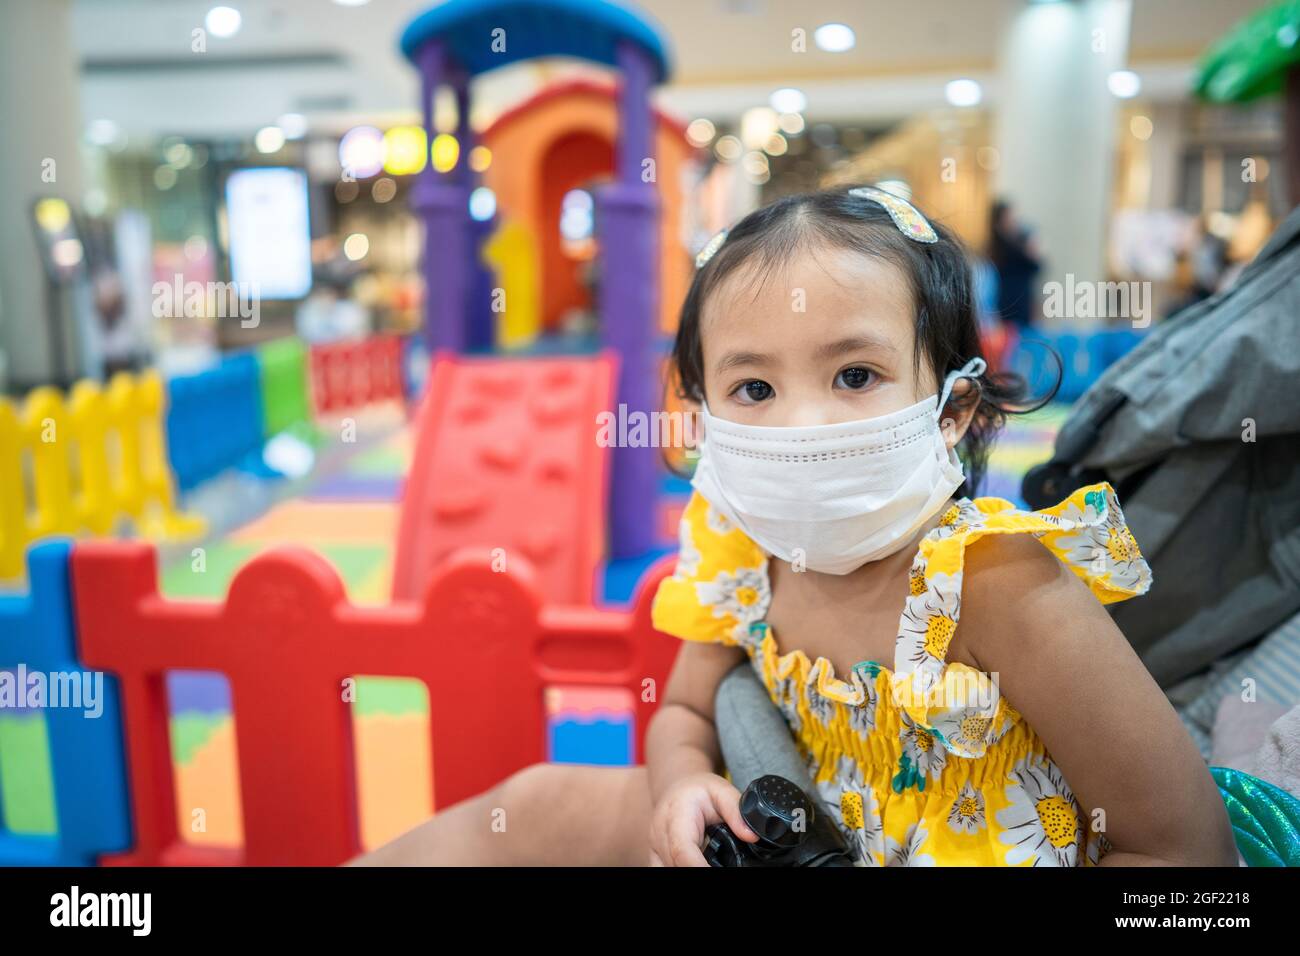 Southeast Asian female kid wearing a facemask at the playground in the mall Stock Photo